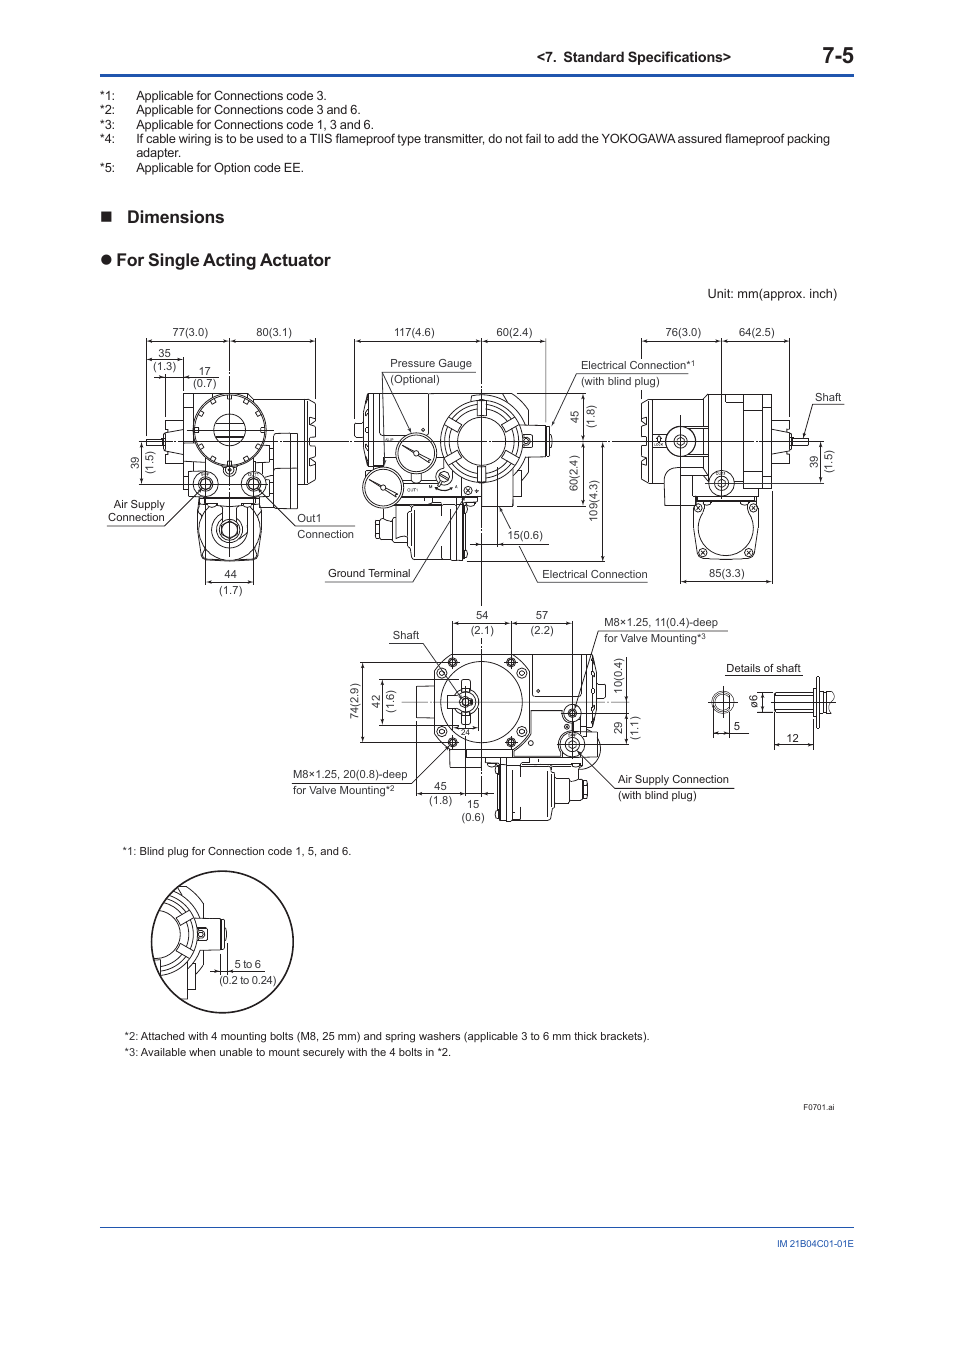 Dimensions l for single acting actuator | Yokogawa YVP110 User Manual | Page 46 / 161